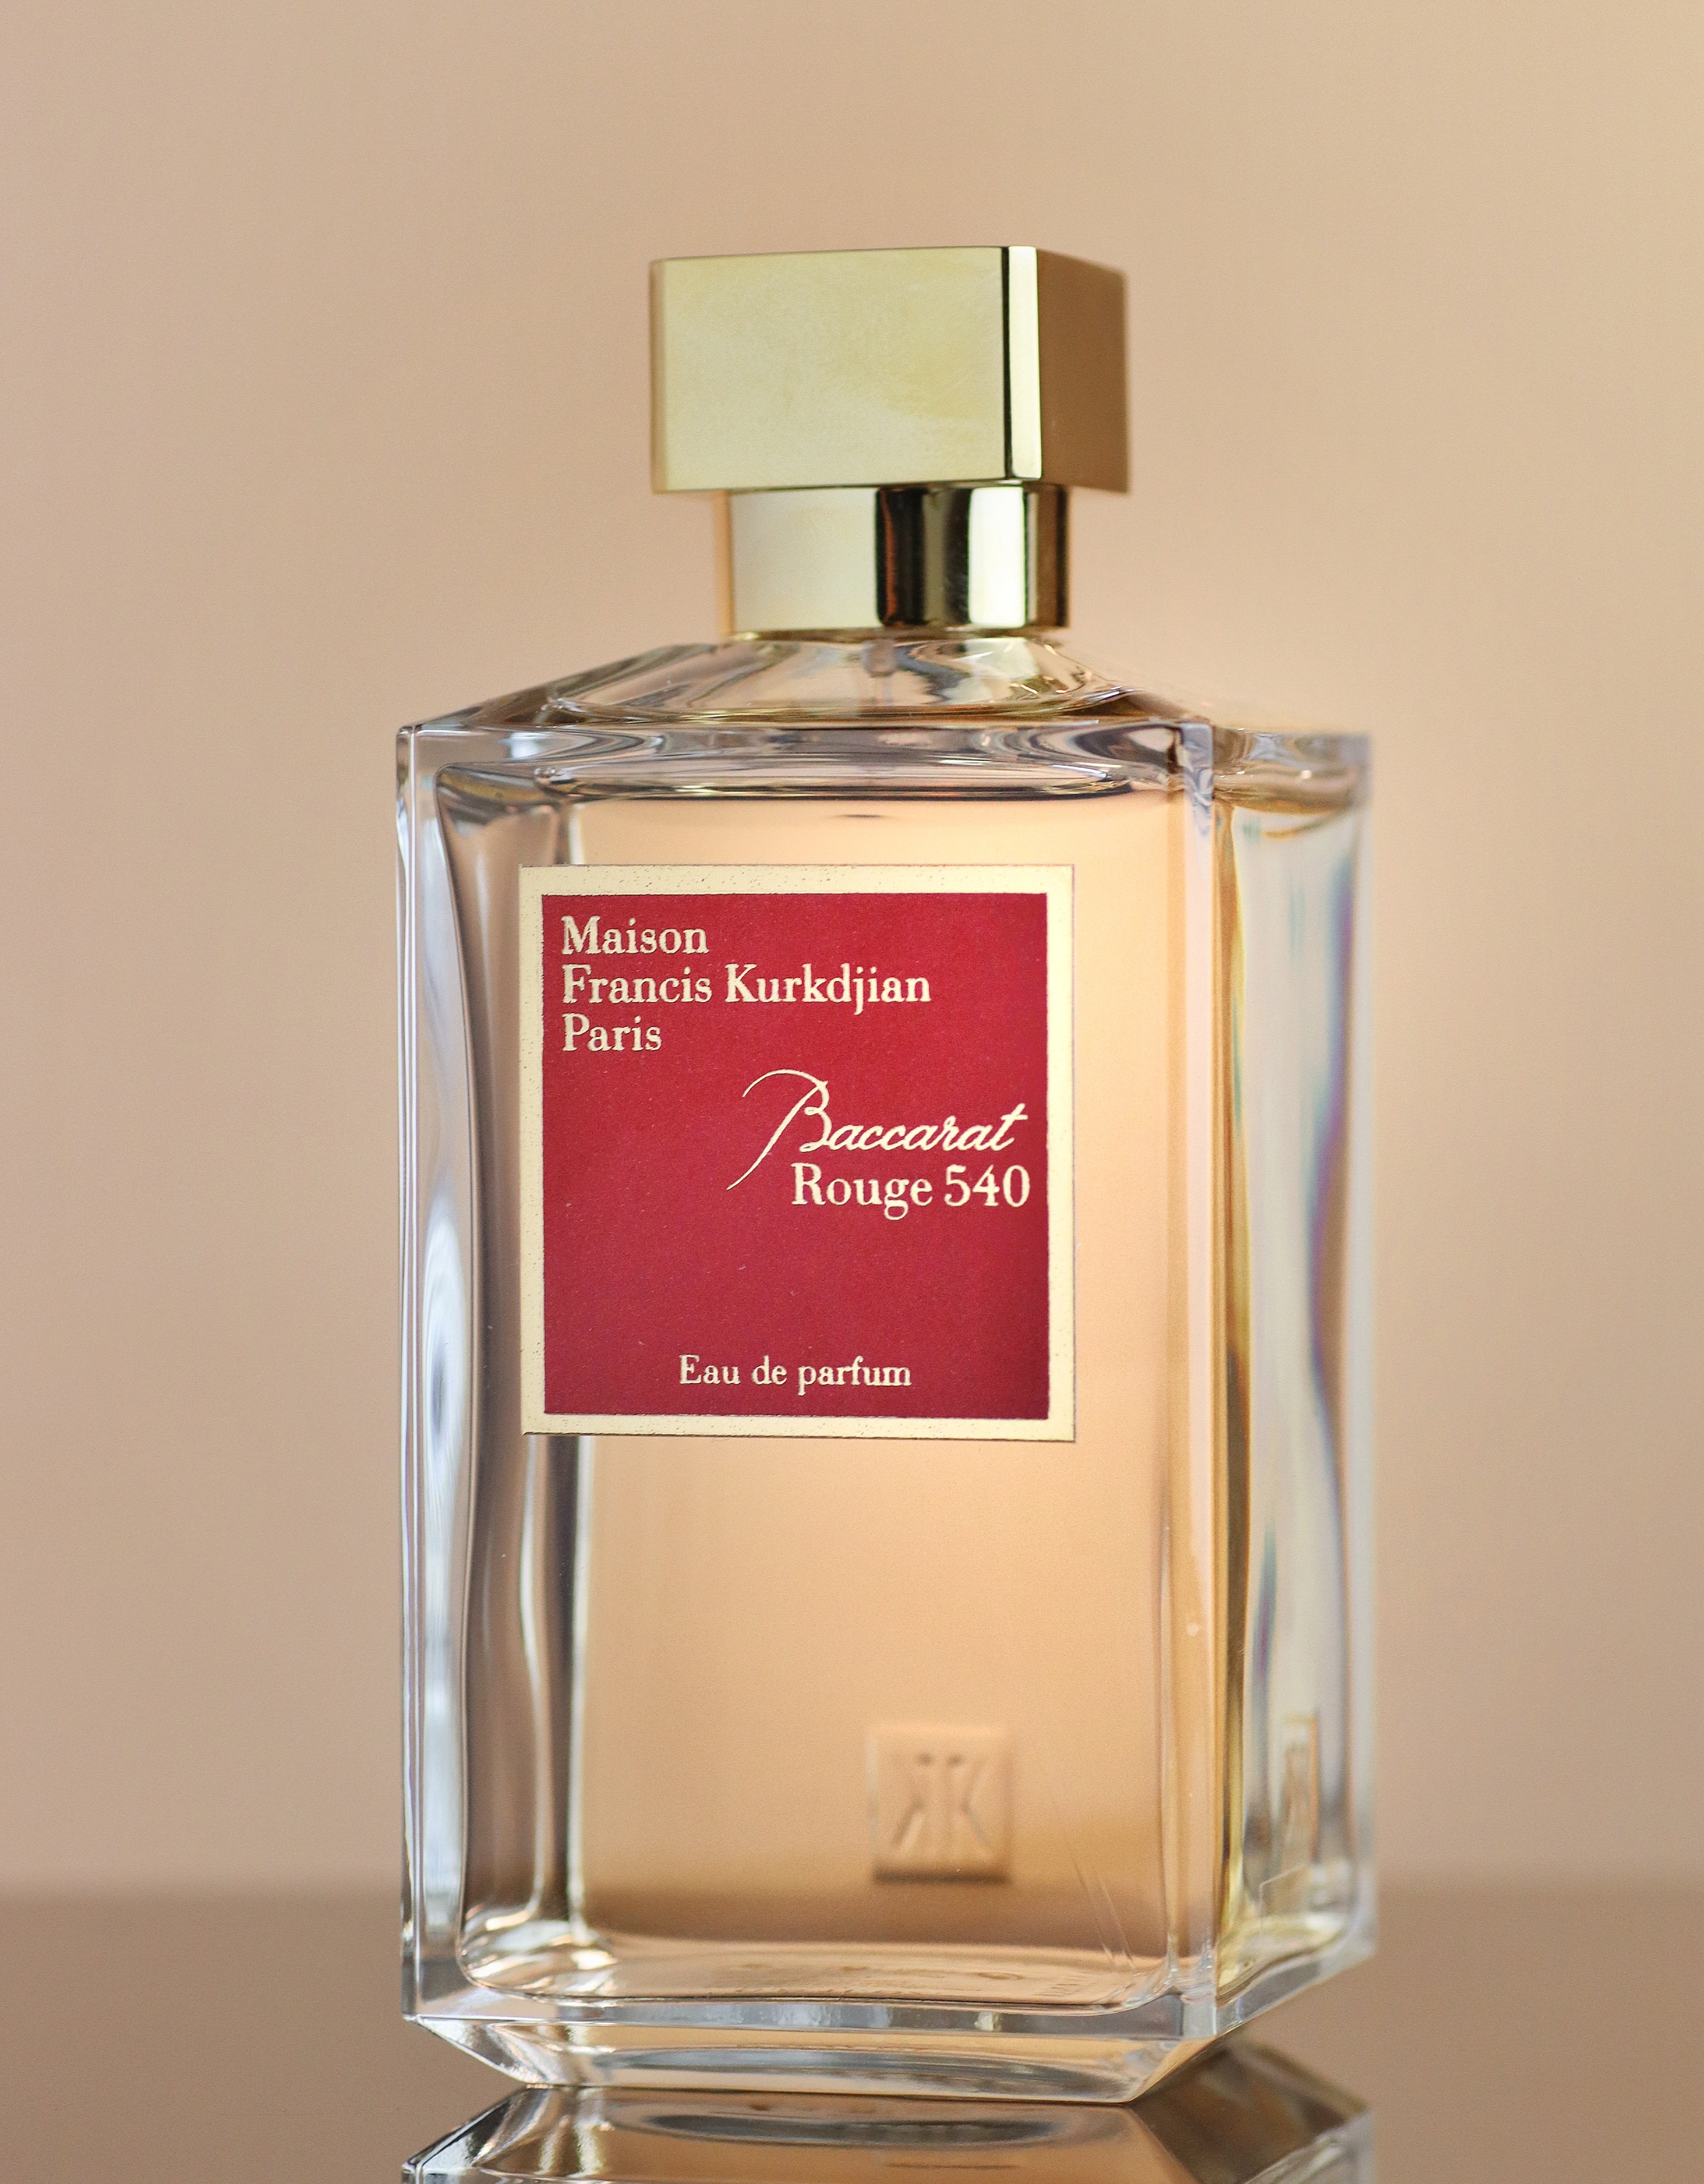 MANSKIN on Instagram: “Baccarat Rouge 540 by Maison Francis Kurkdjian is a  unisex fragrance. It has notes of Saffron, Jasmine; Amberwood, Ambergris;  Fir Resin and…”